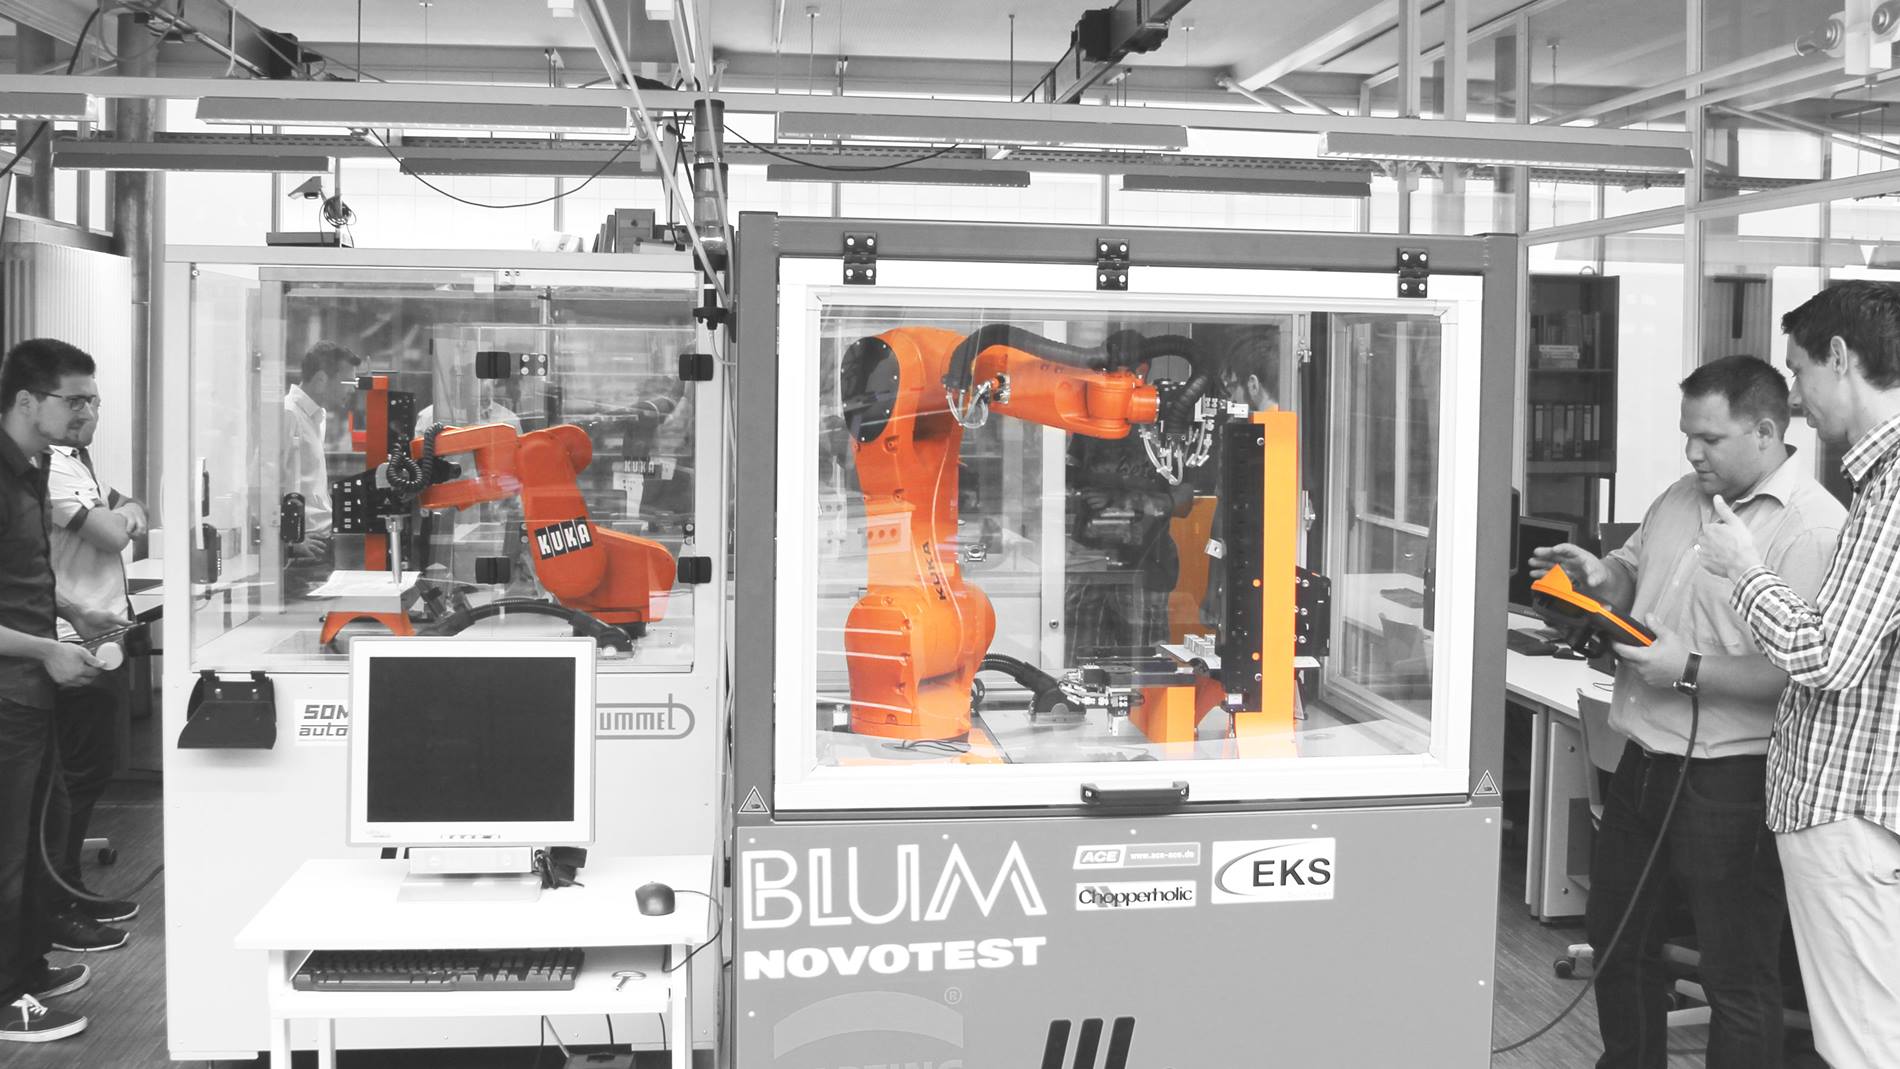 KUKA supports Tettnang School of Electrical Engineering